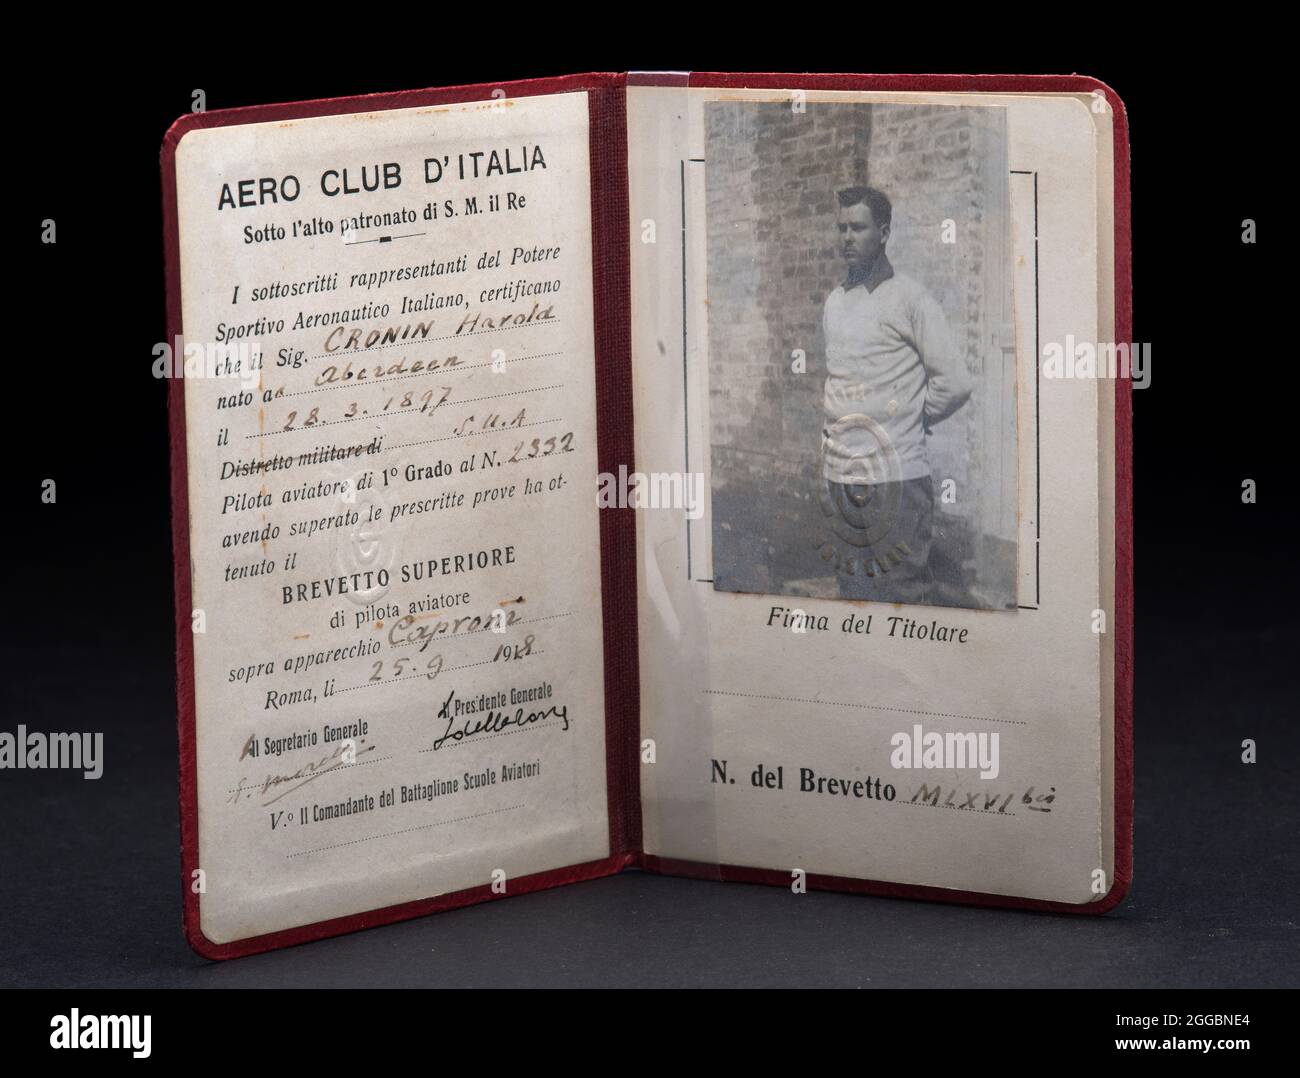 Pilot's license, Brevetto Superiore, 1918. Paper certificate with red leather case, issued by the Aero Club d'Italia to Harold Cronin, entitling him to fly Caproni aircraft. Stock Photo